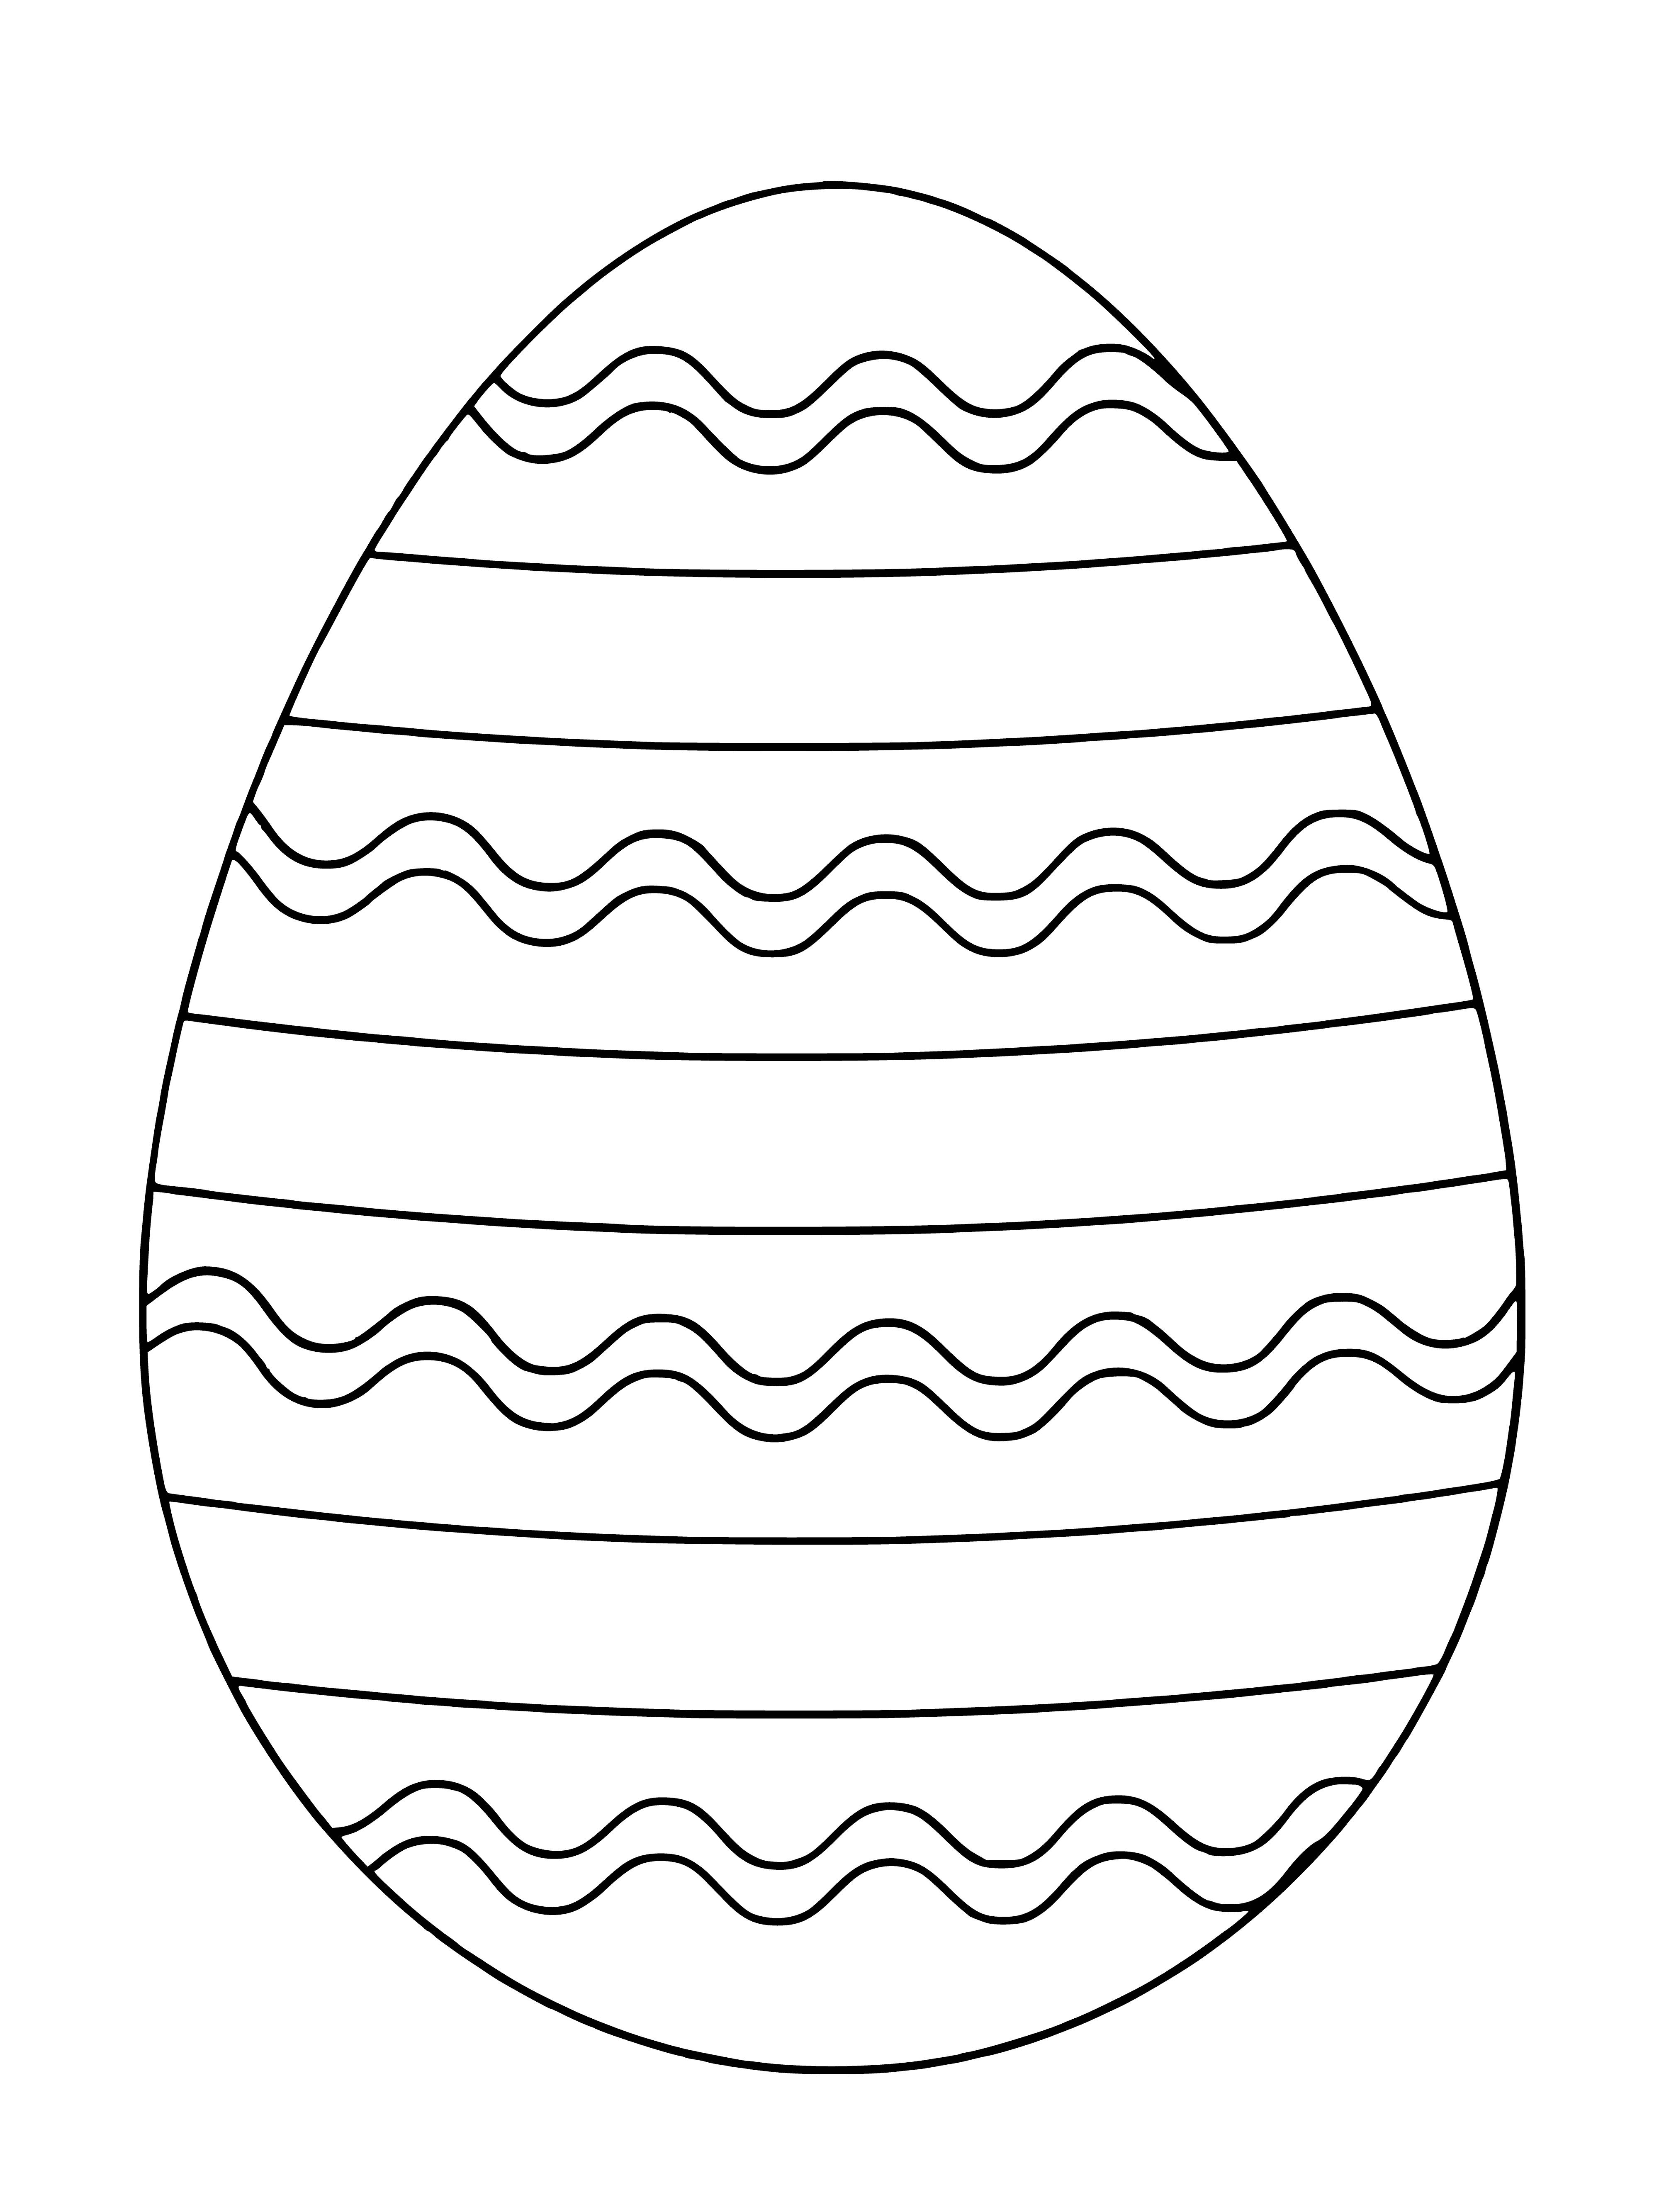 coloring page: Three eggs on the right side of screen with different designs, plus a large egg on left side with green plant growing from it.